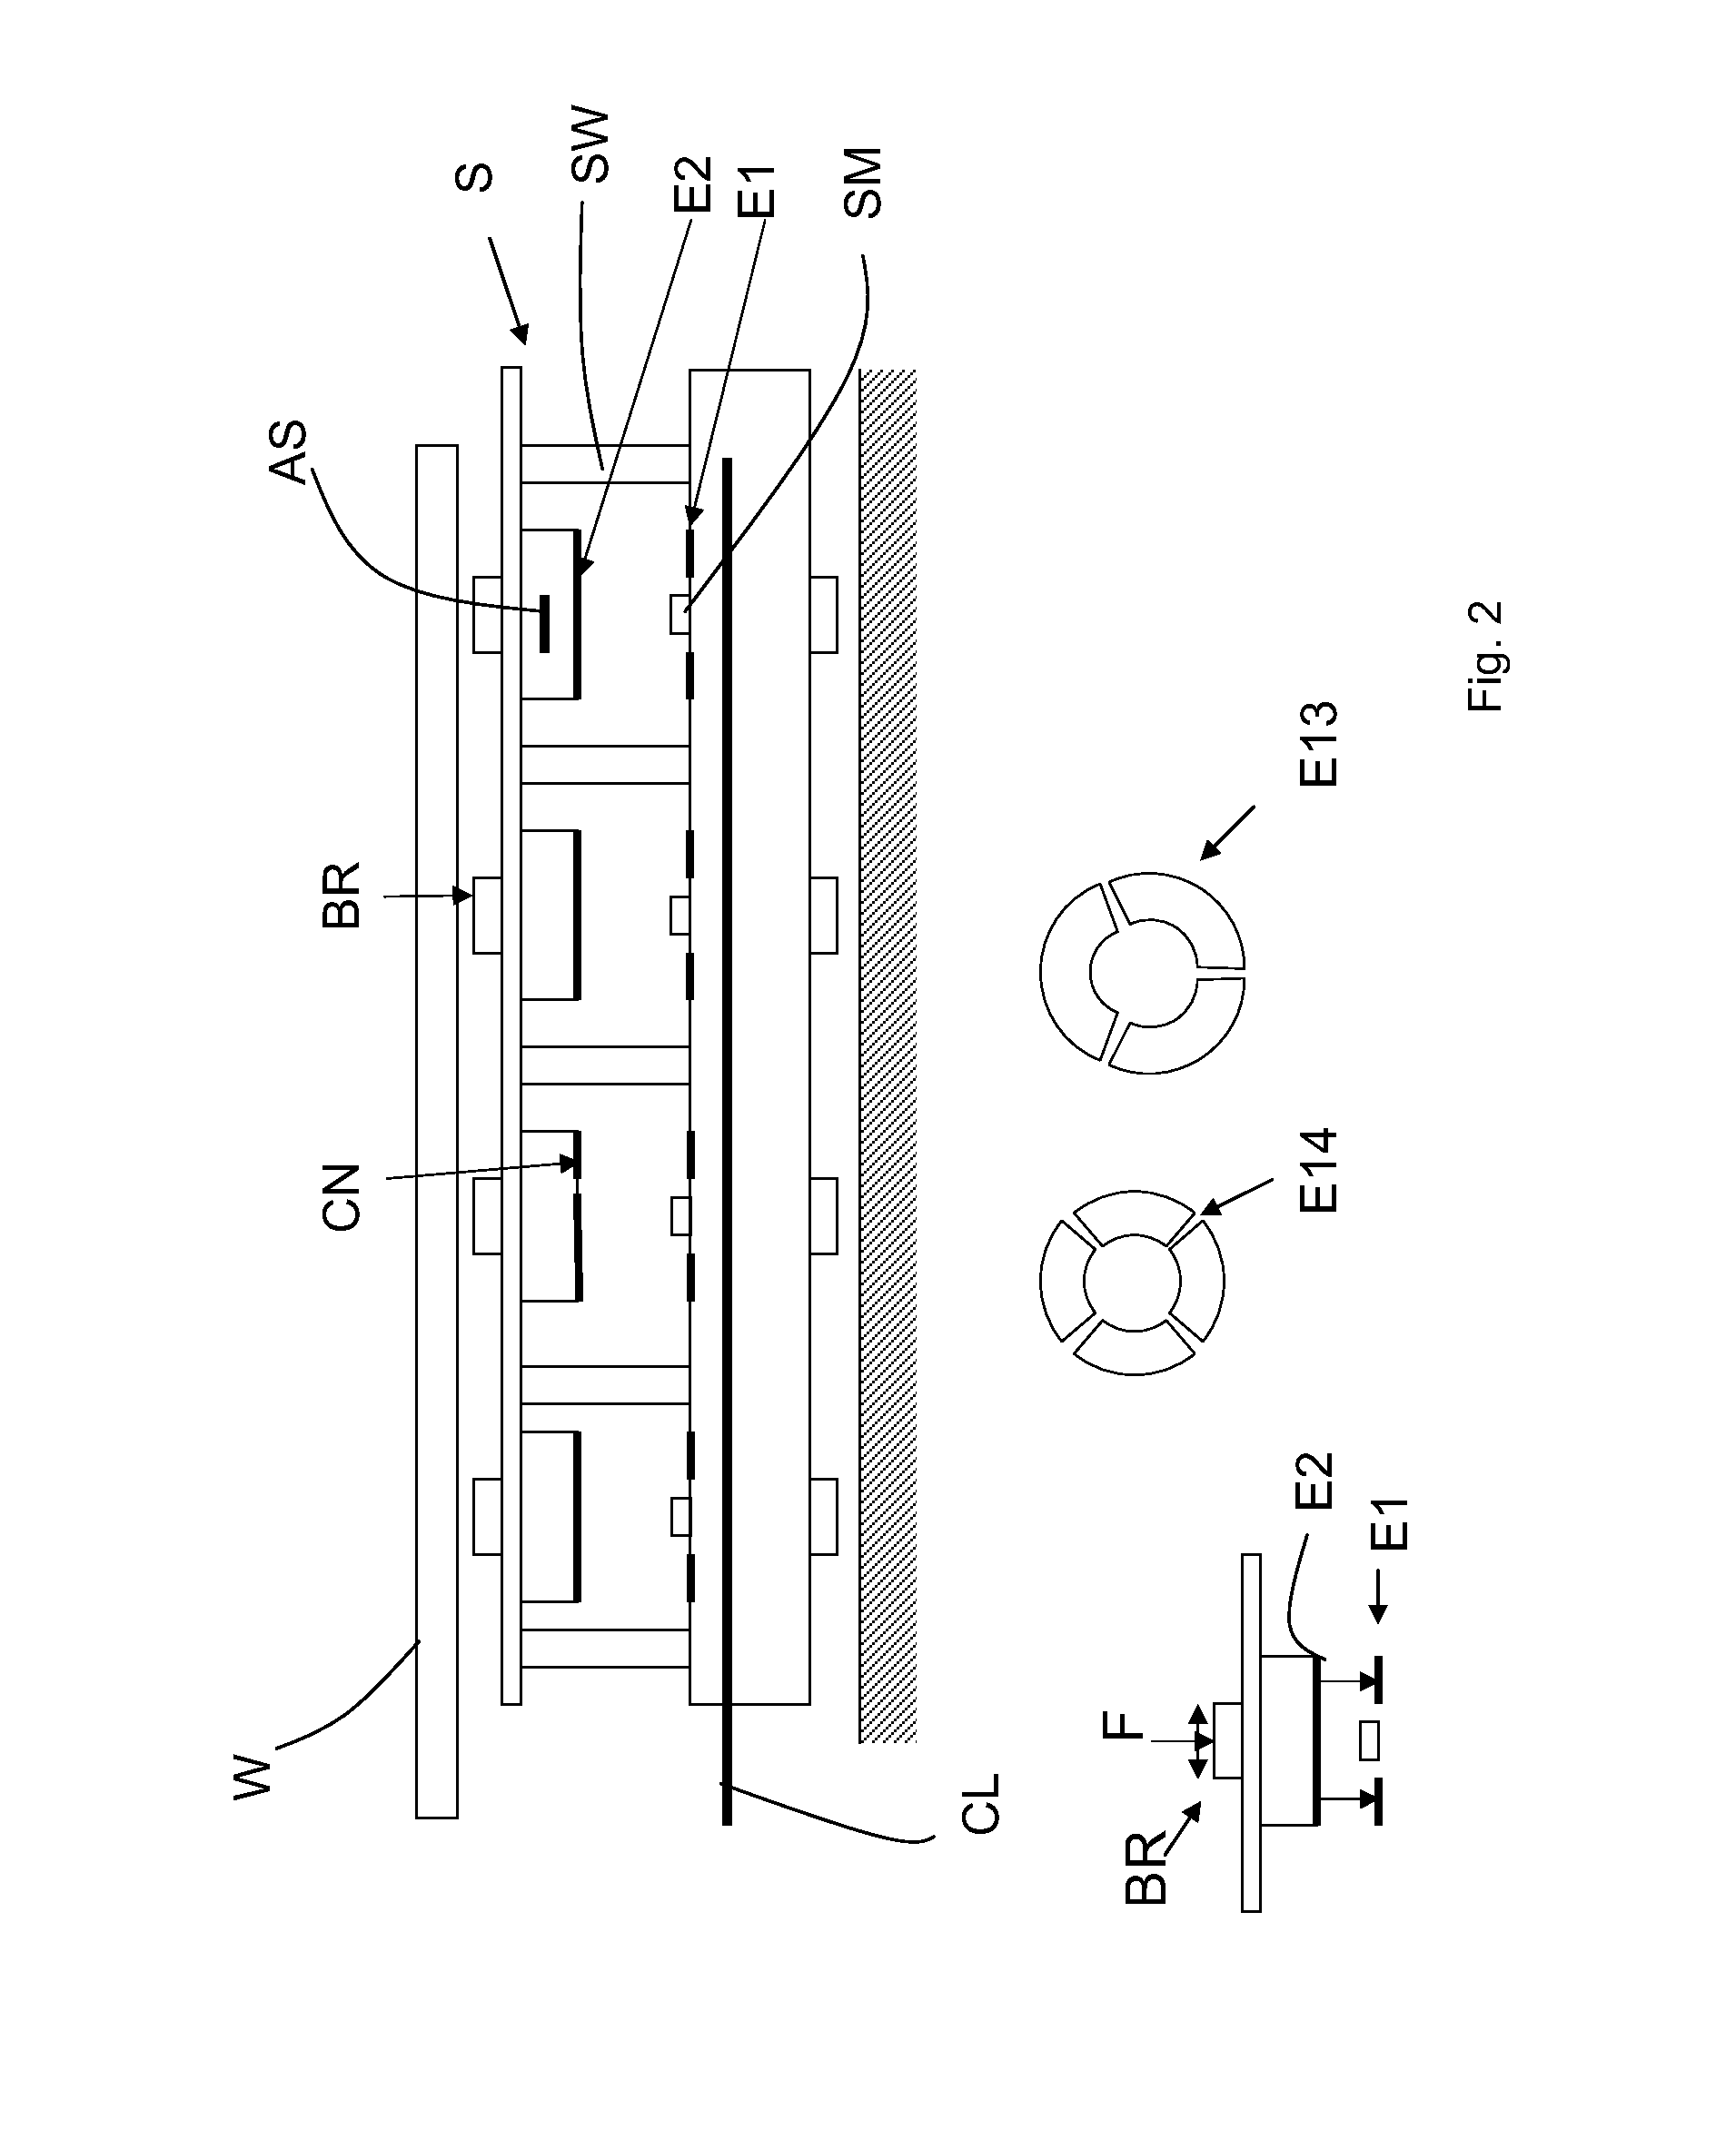 Lithographic Apparatus Comprising a Support for Holding an Object, and a Support for Use therein